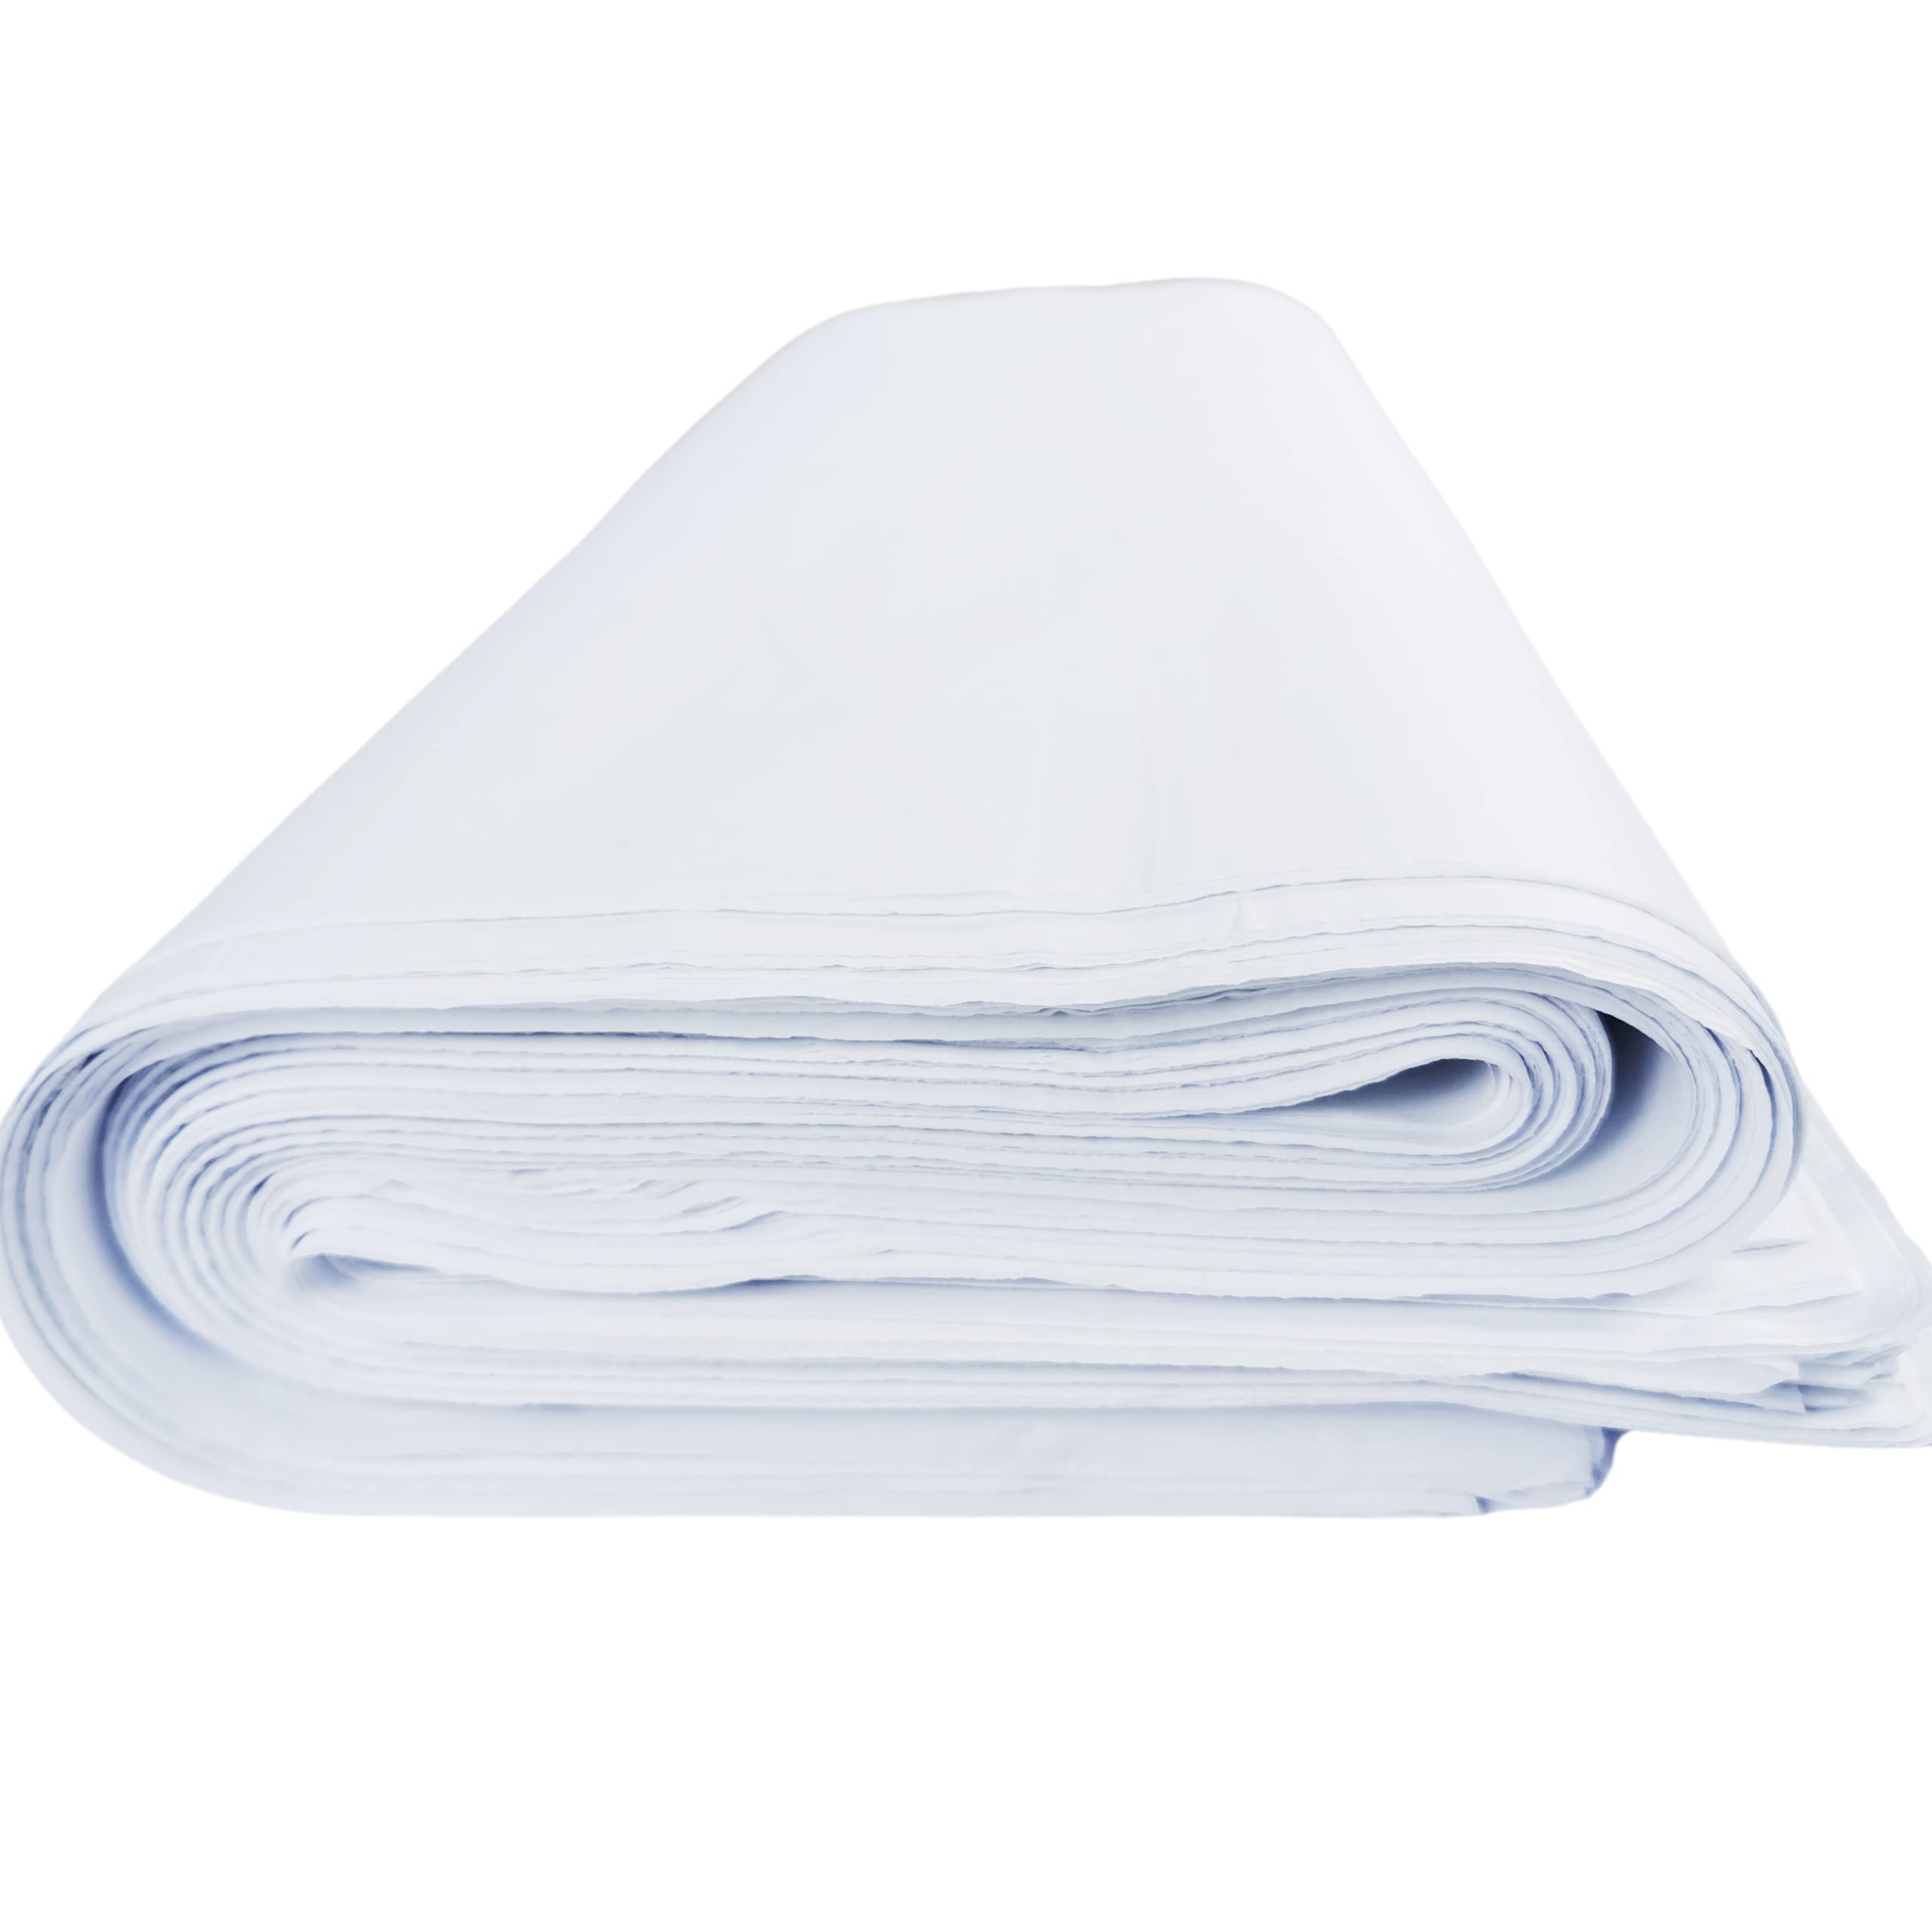 White Tissue Paper Large Sheets, Acid Free Art Paper, Perfect for Gift Wrap, Storage, Packing, Art & Craft Bulk Pack Archiving Shredding 70 x 50cm Sheet Size